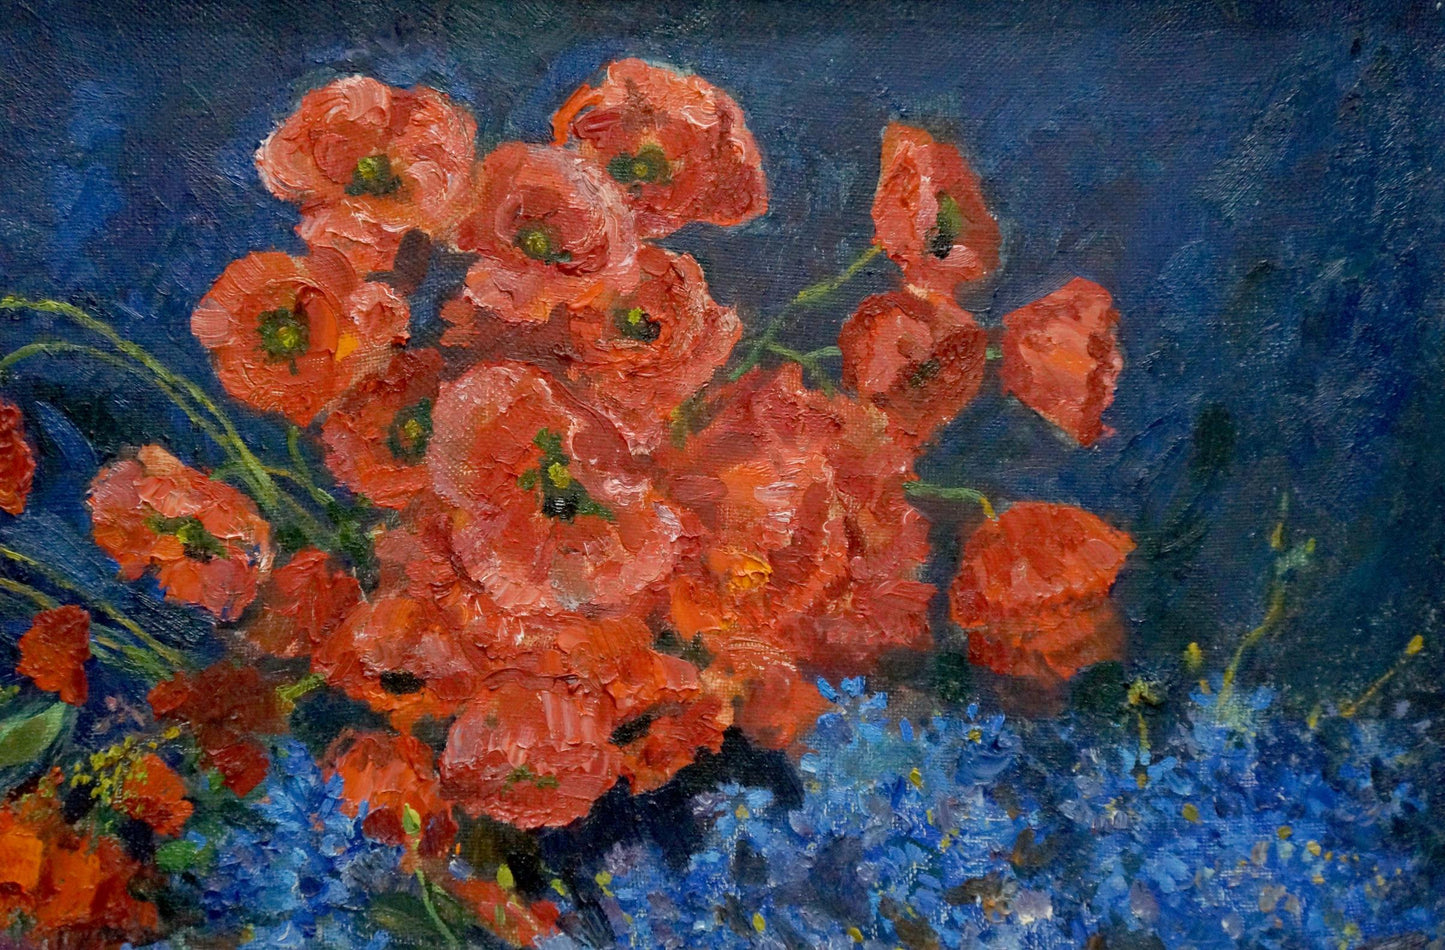 In Alexander Fedorovich Mynka's oil painting, poppies take center stage in a still life